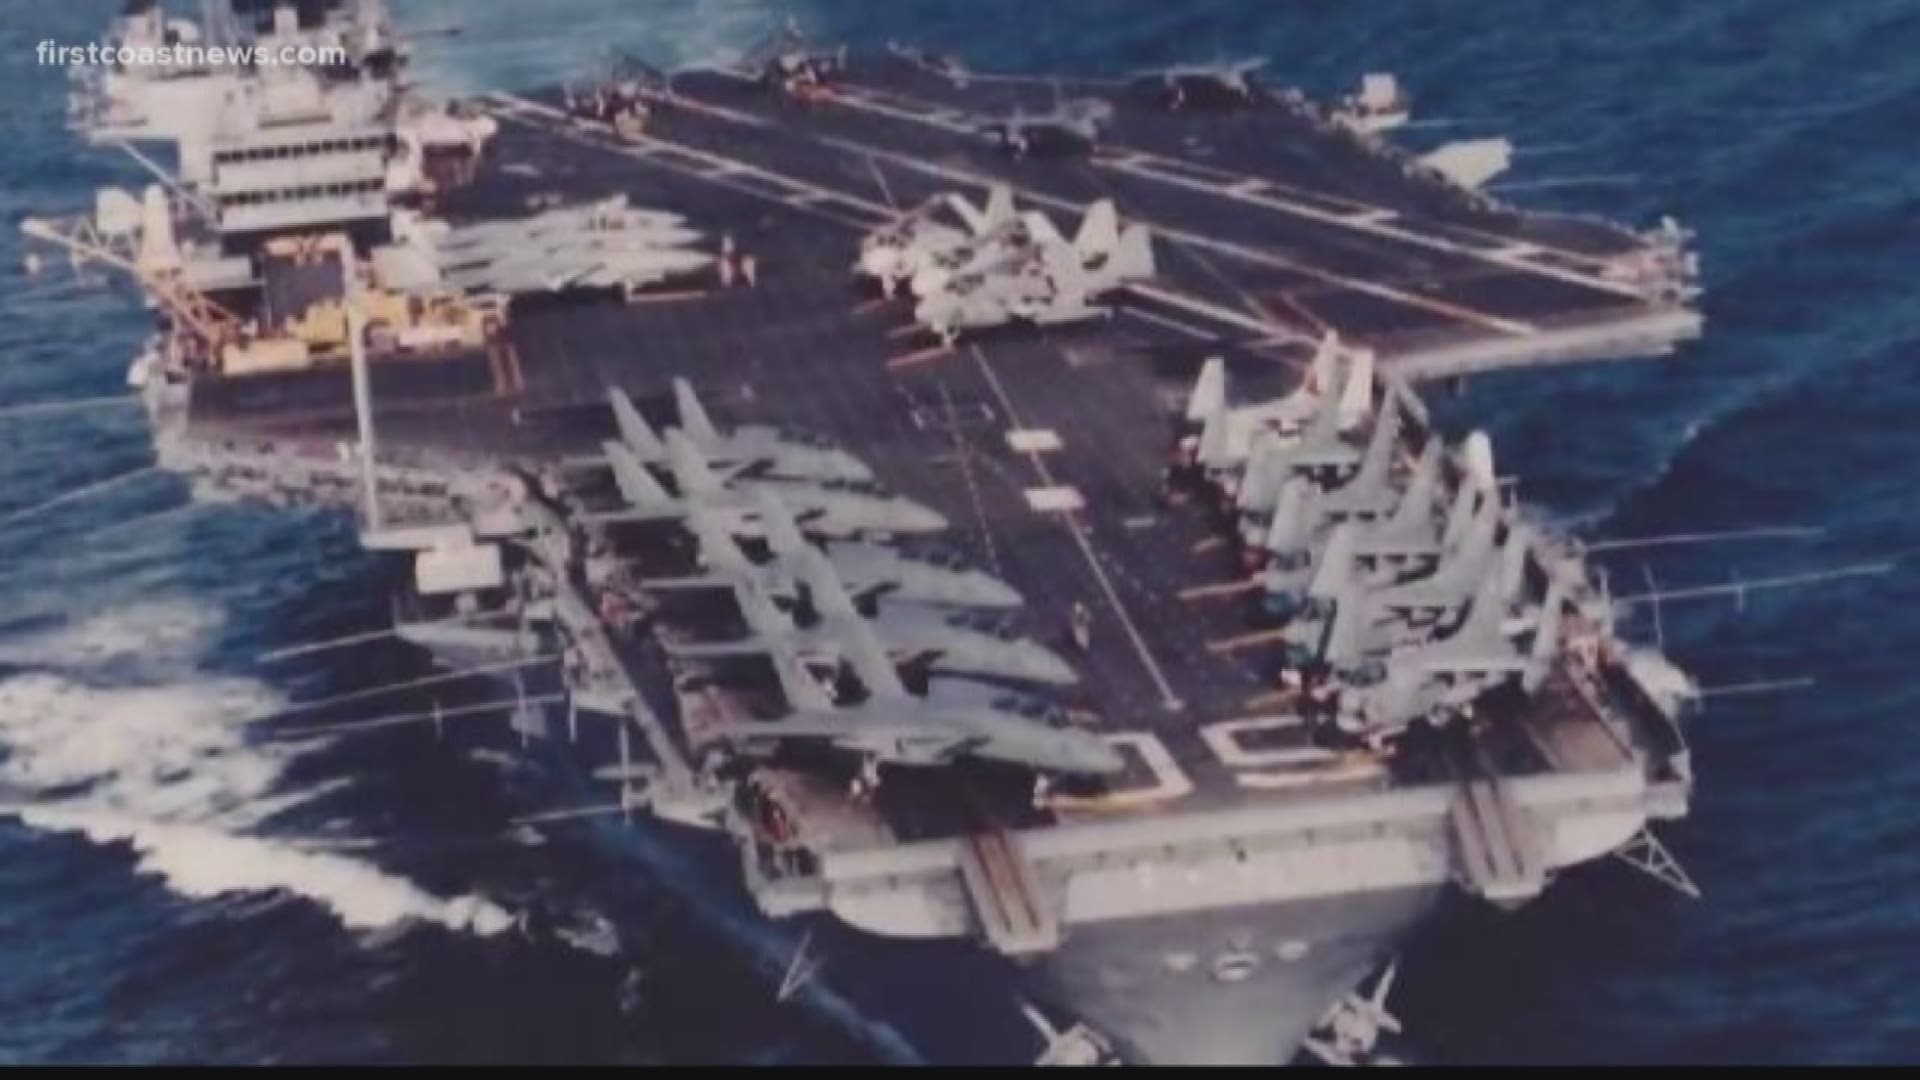 The USS Saratoga called Mayport home from 1957 to 1994.